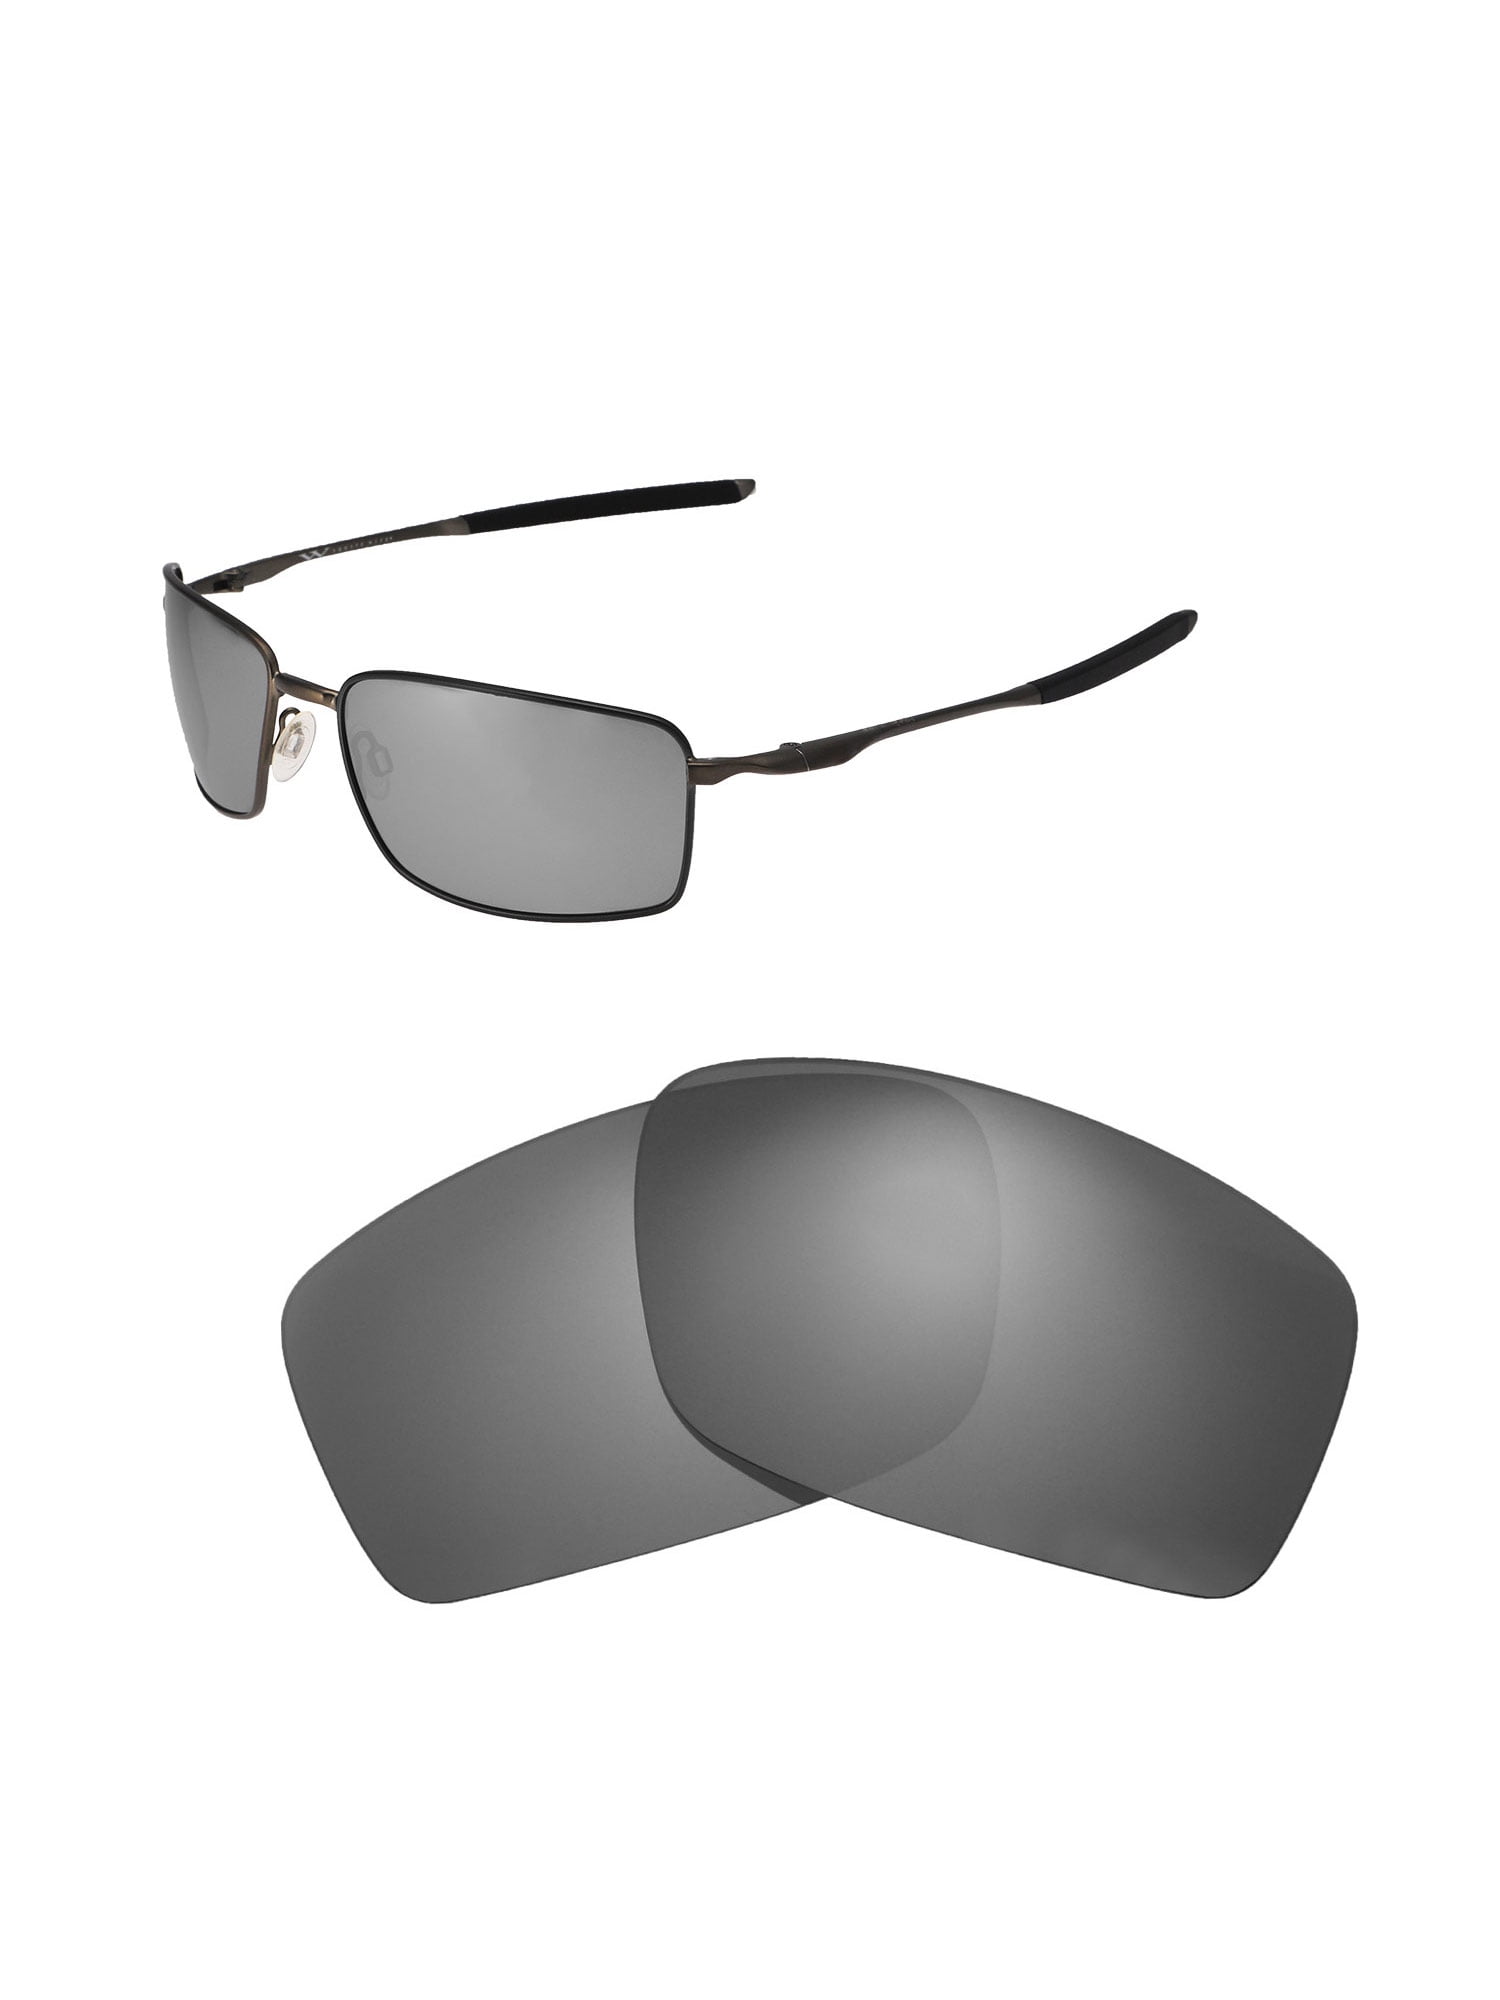 oakley square wire replacement lenses